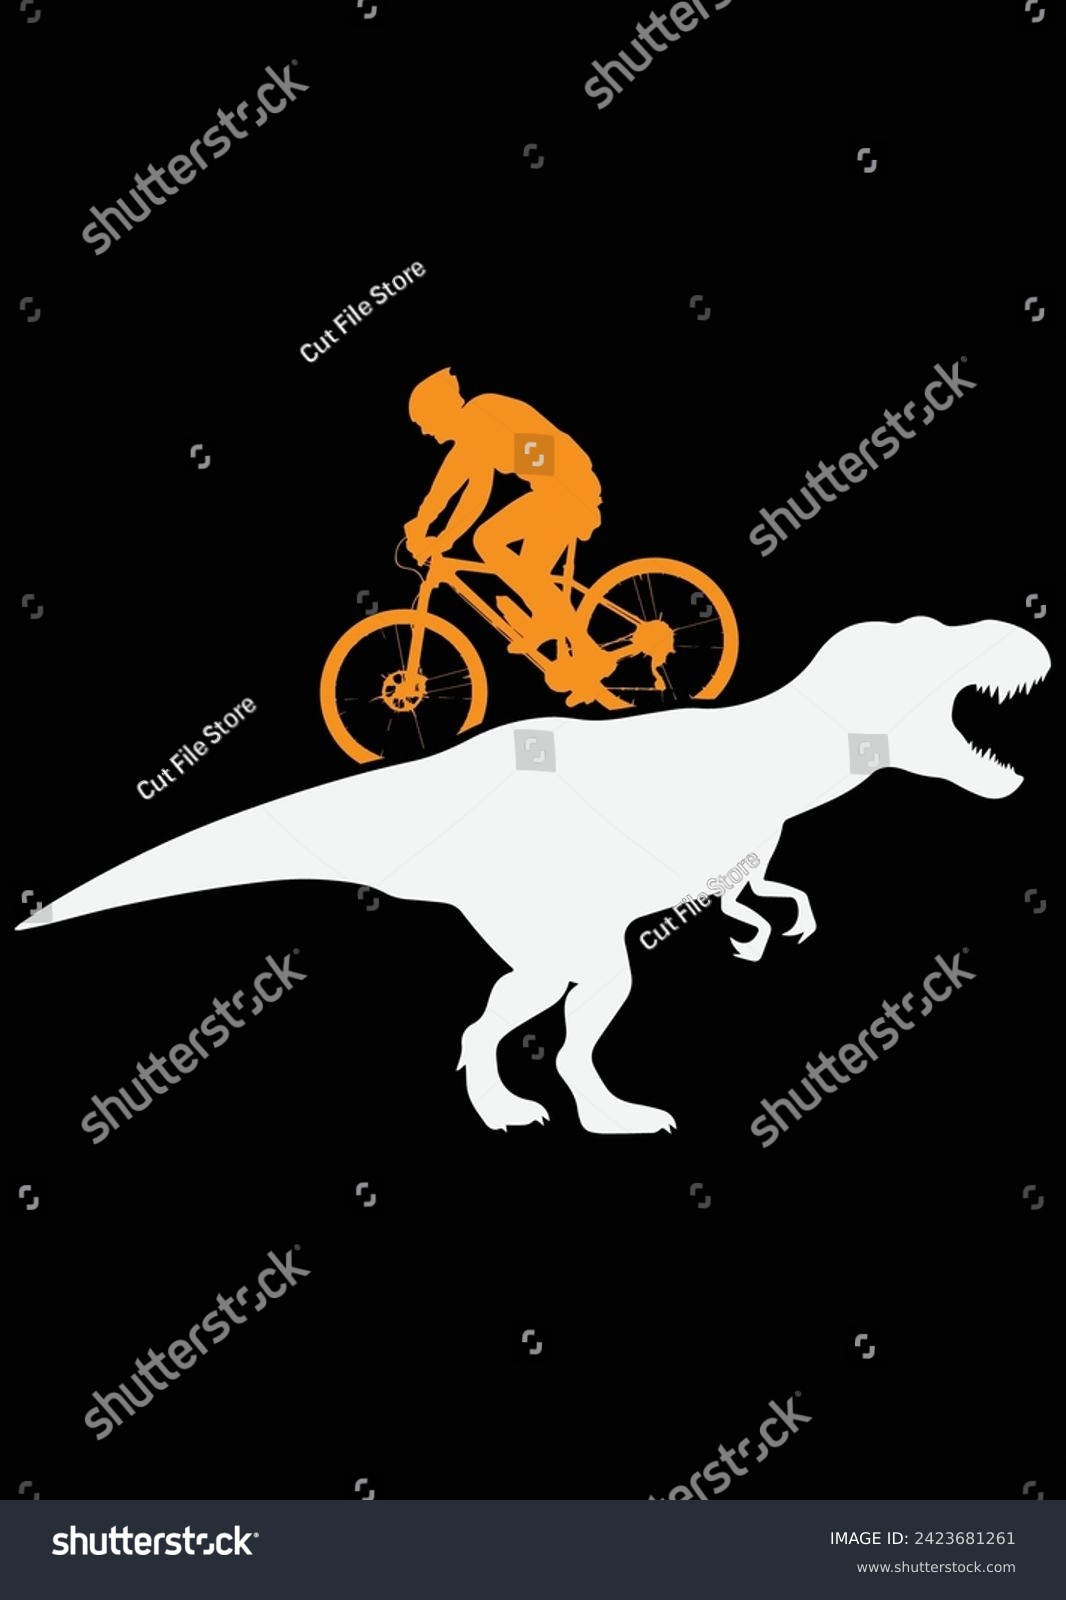 SVG of 
T-Rex Cycling eps cut file for cutting machine svg